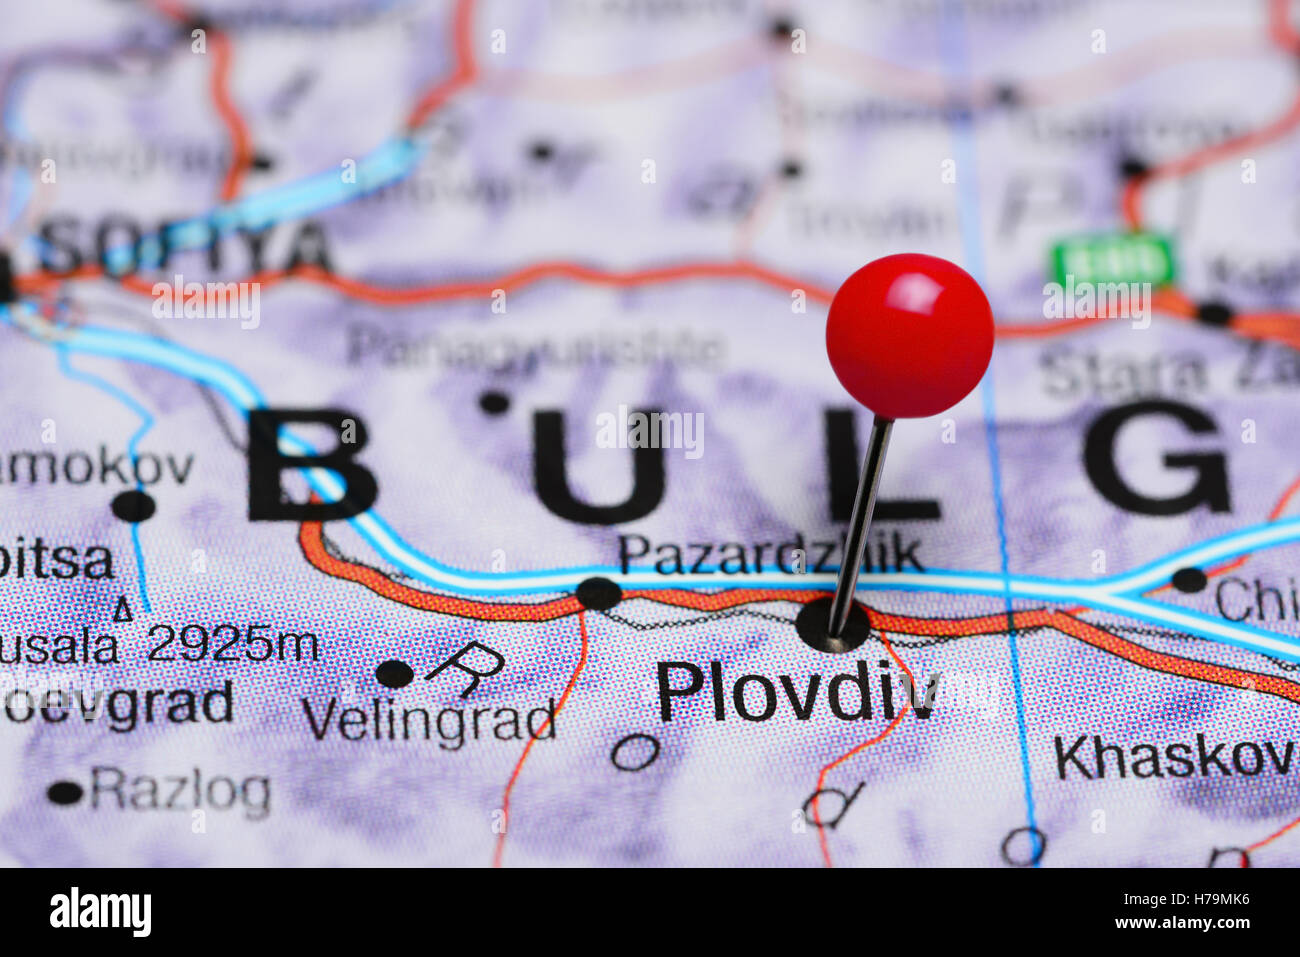 Plovdiv pinned on a map of Bulgaria Stock Photo